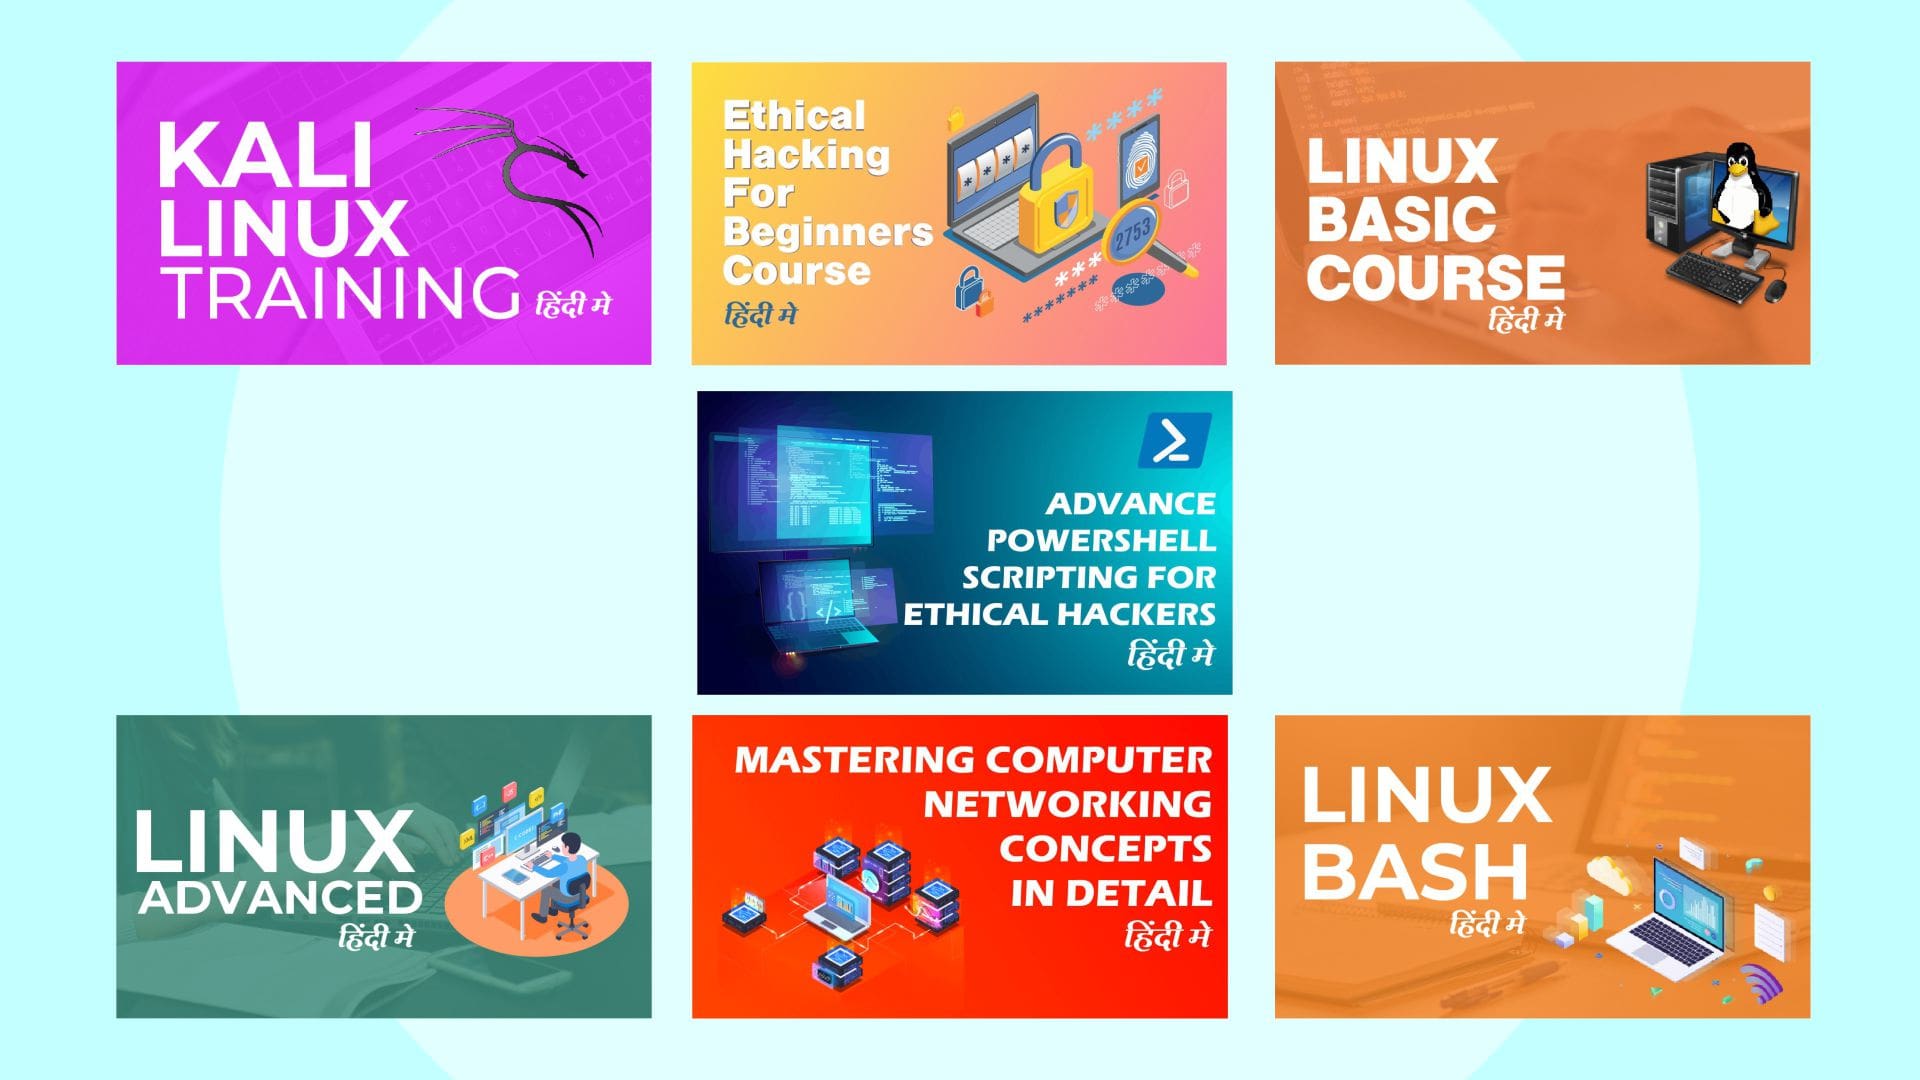 Hacking for Beginners + Linux Master Course + Networking + Powershell Scripting 